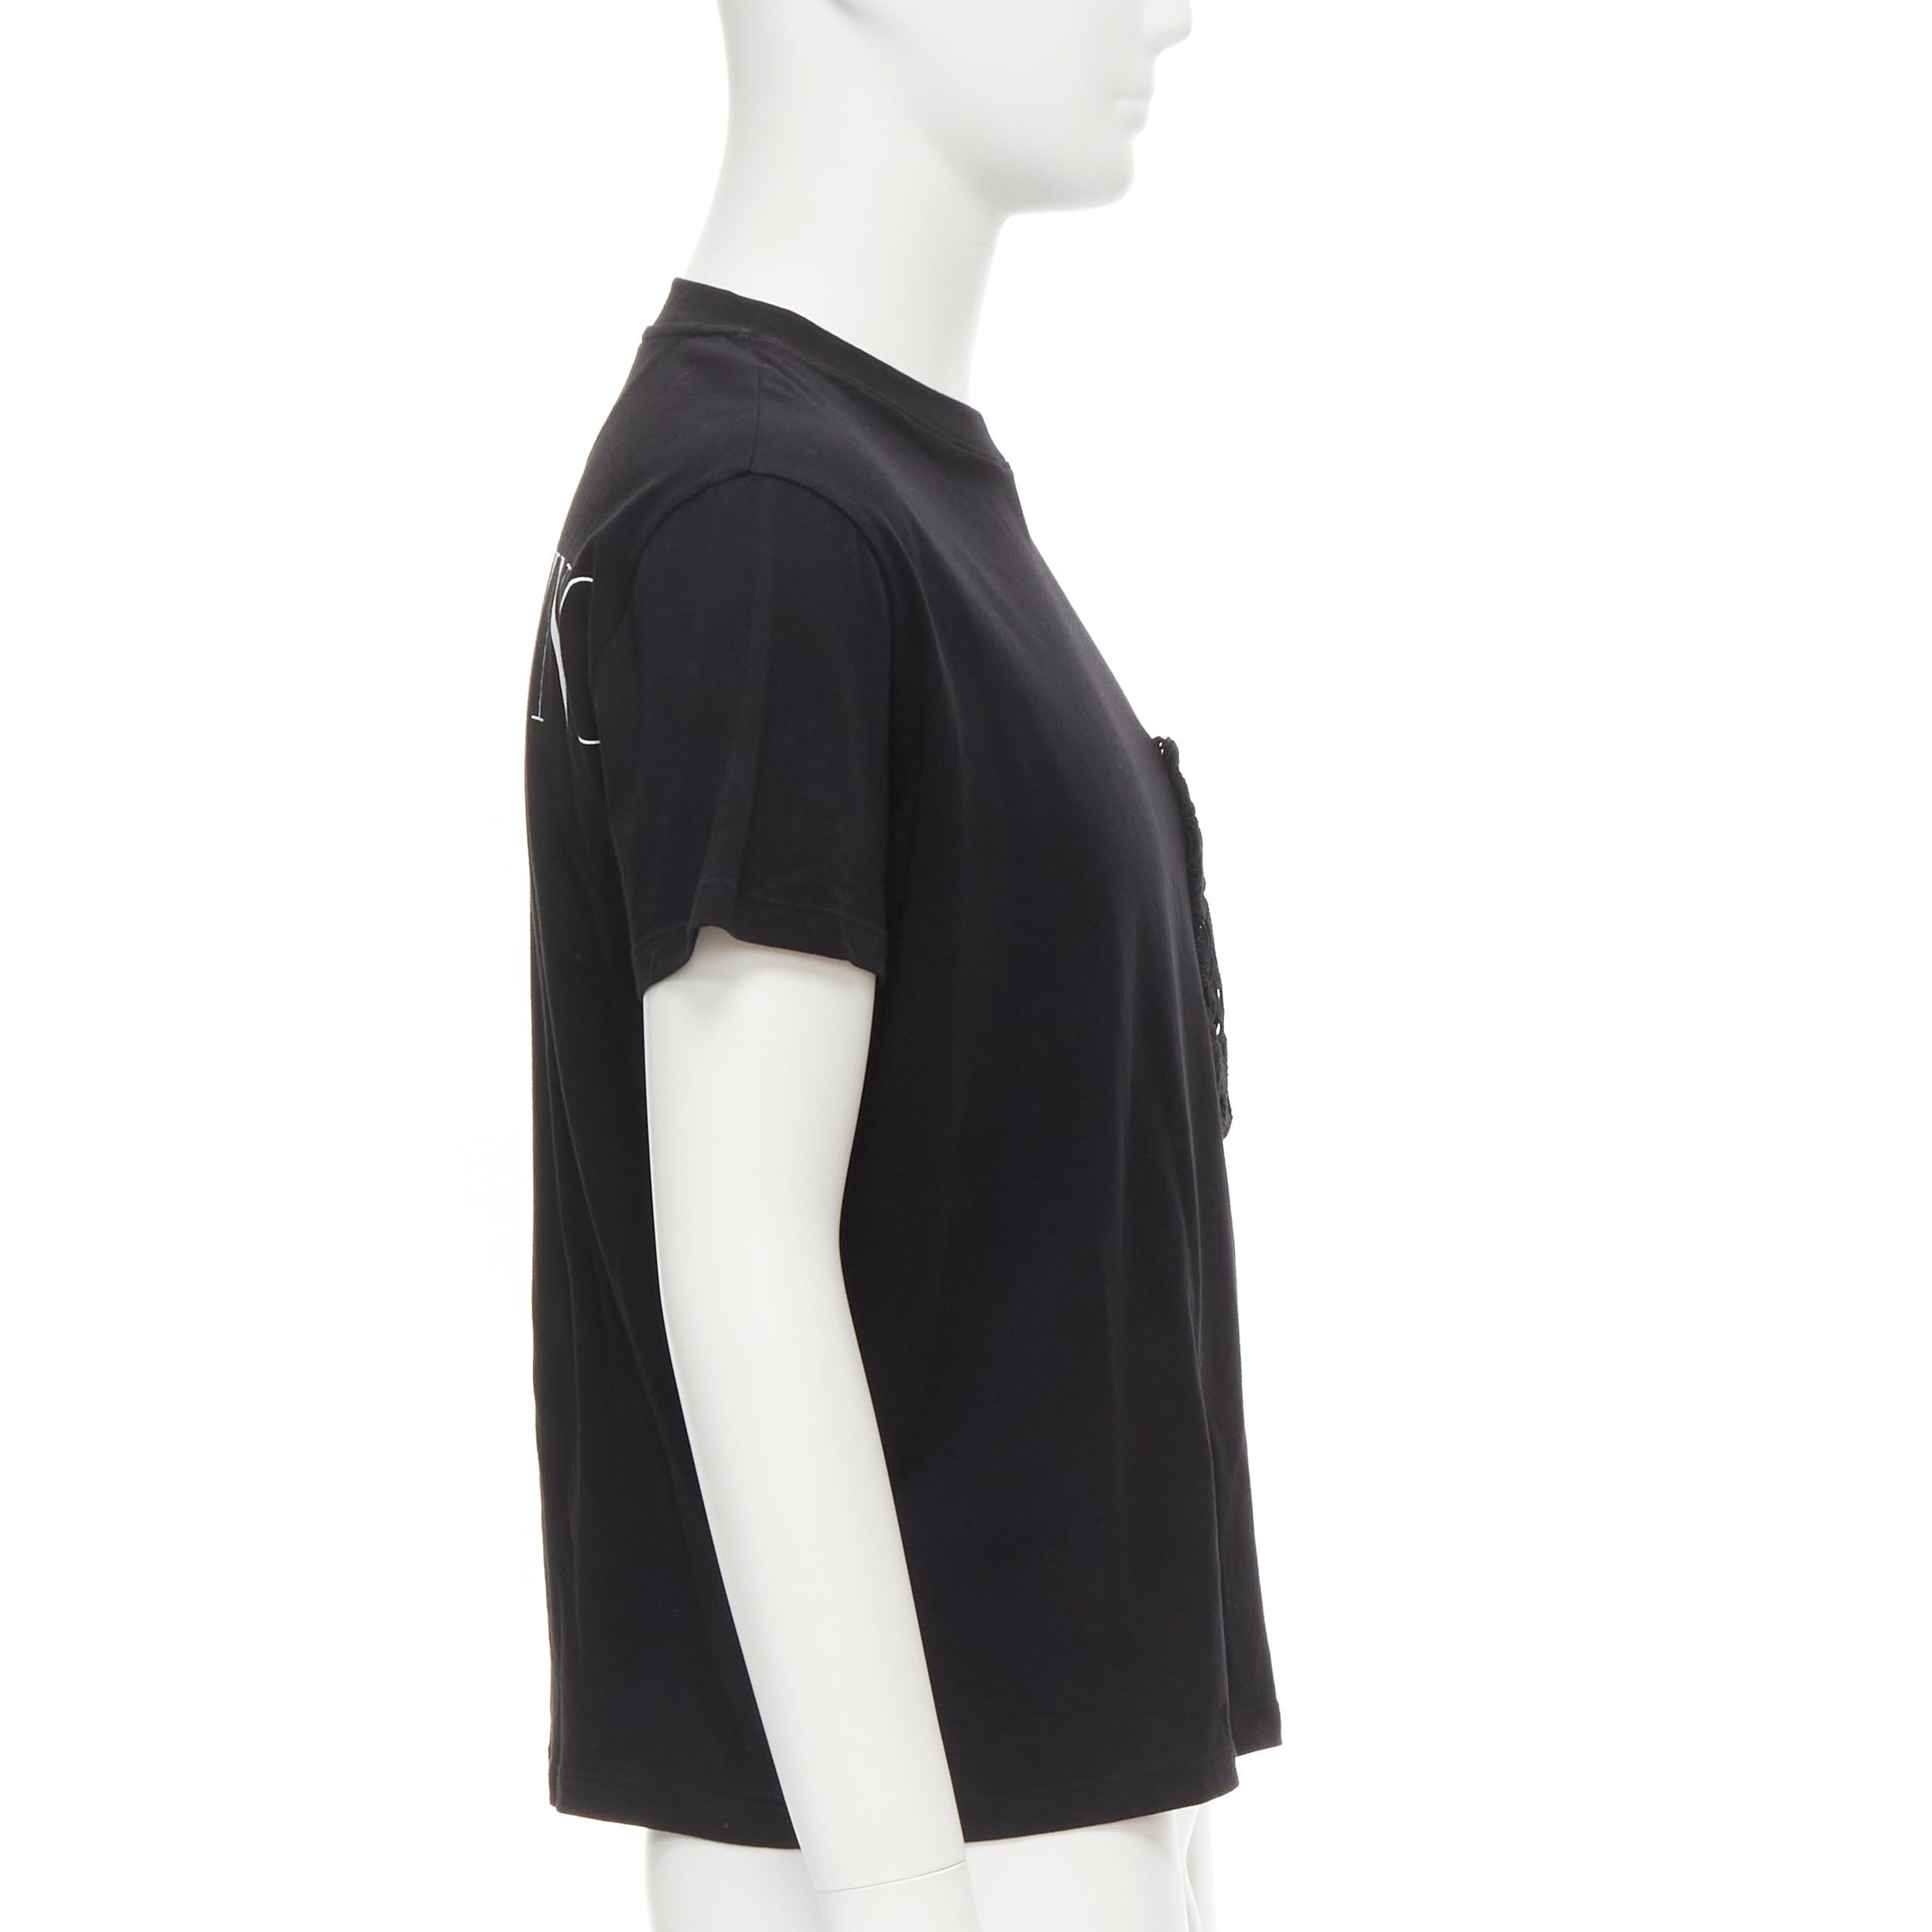 VALENTINO floral lace breast pocket white logo black cotton tshirt S For Sale 1